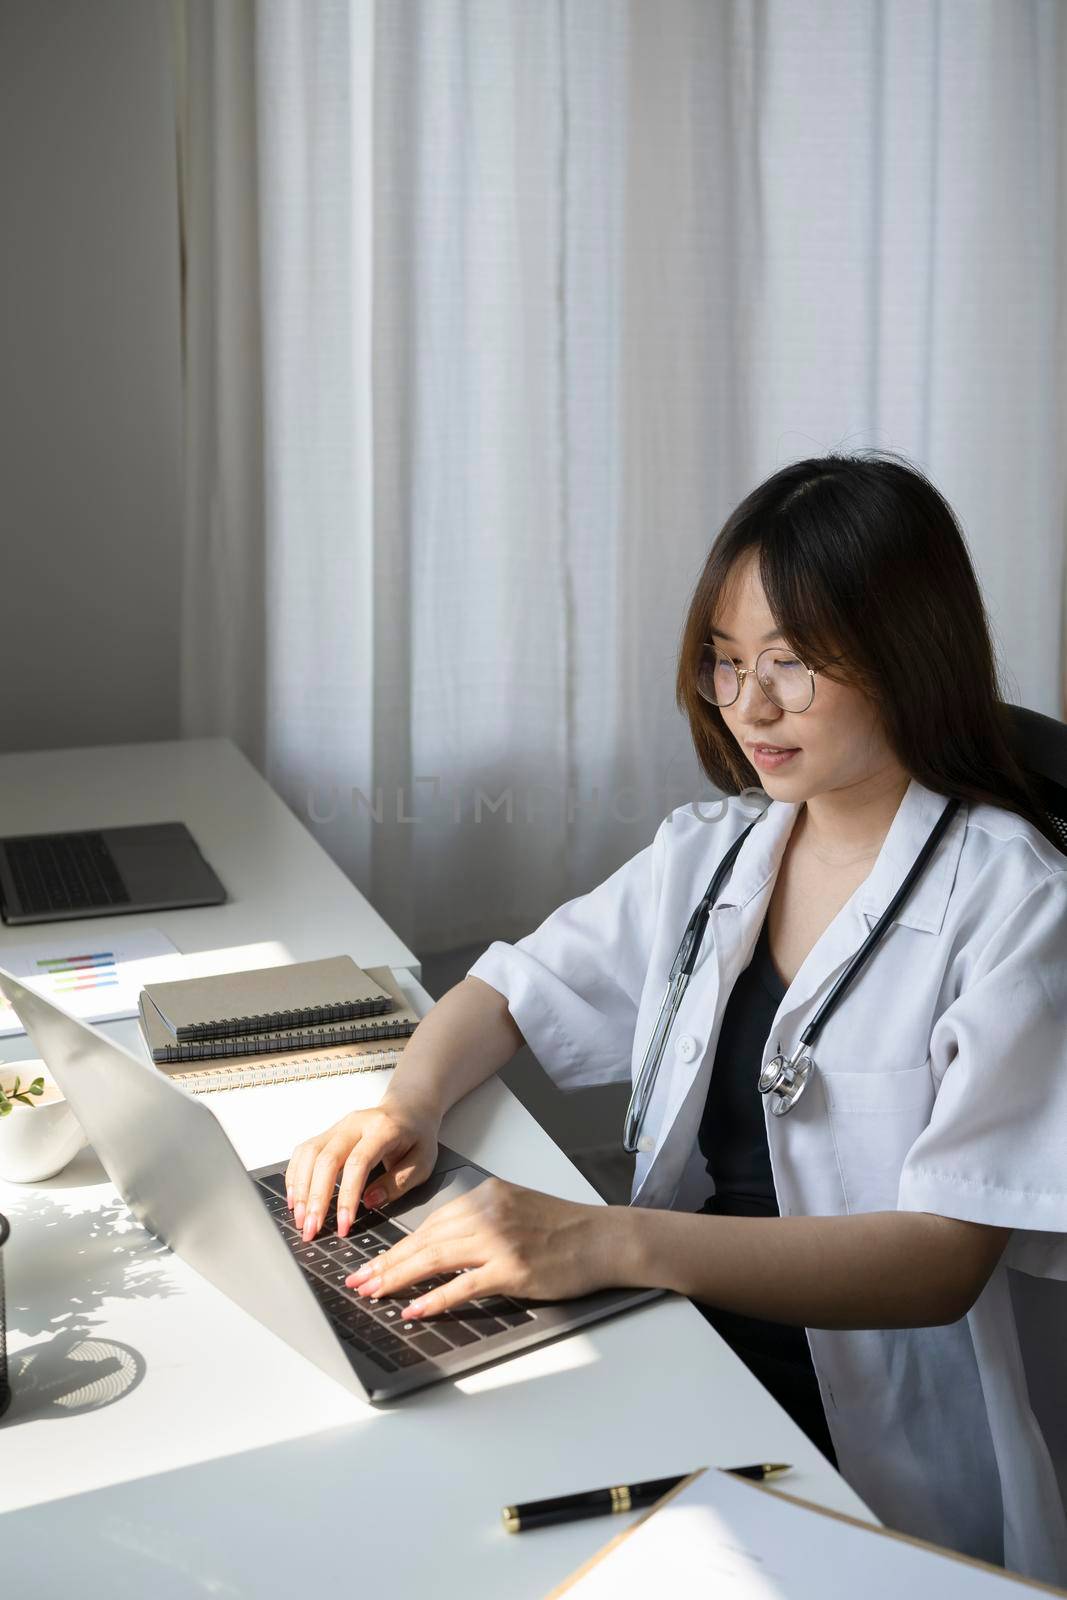 Attractive female doctor is working with documents and laptop in her medical office.